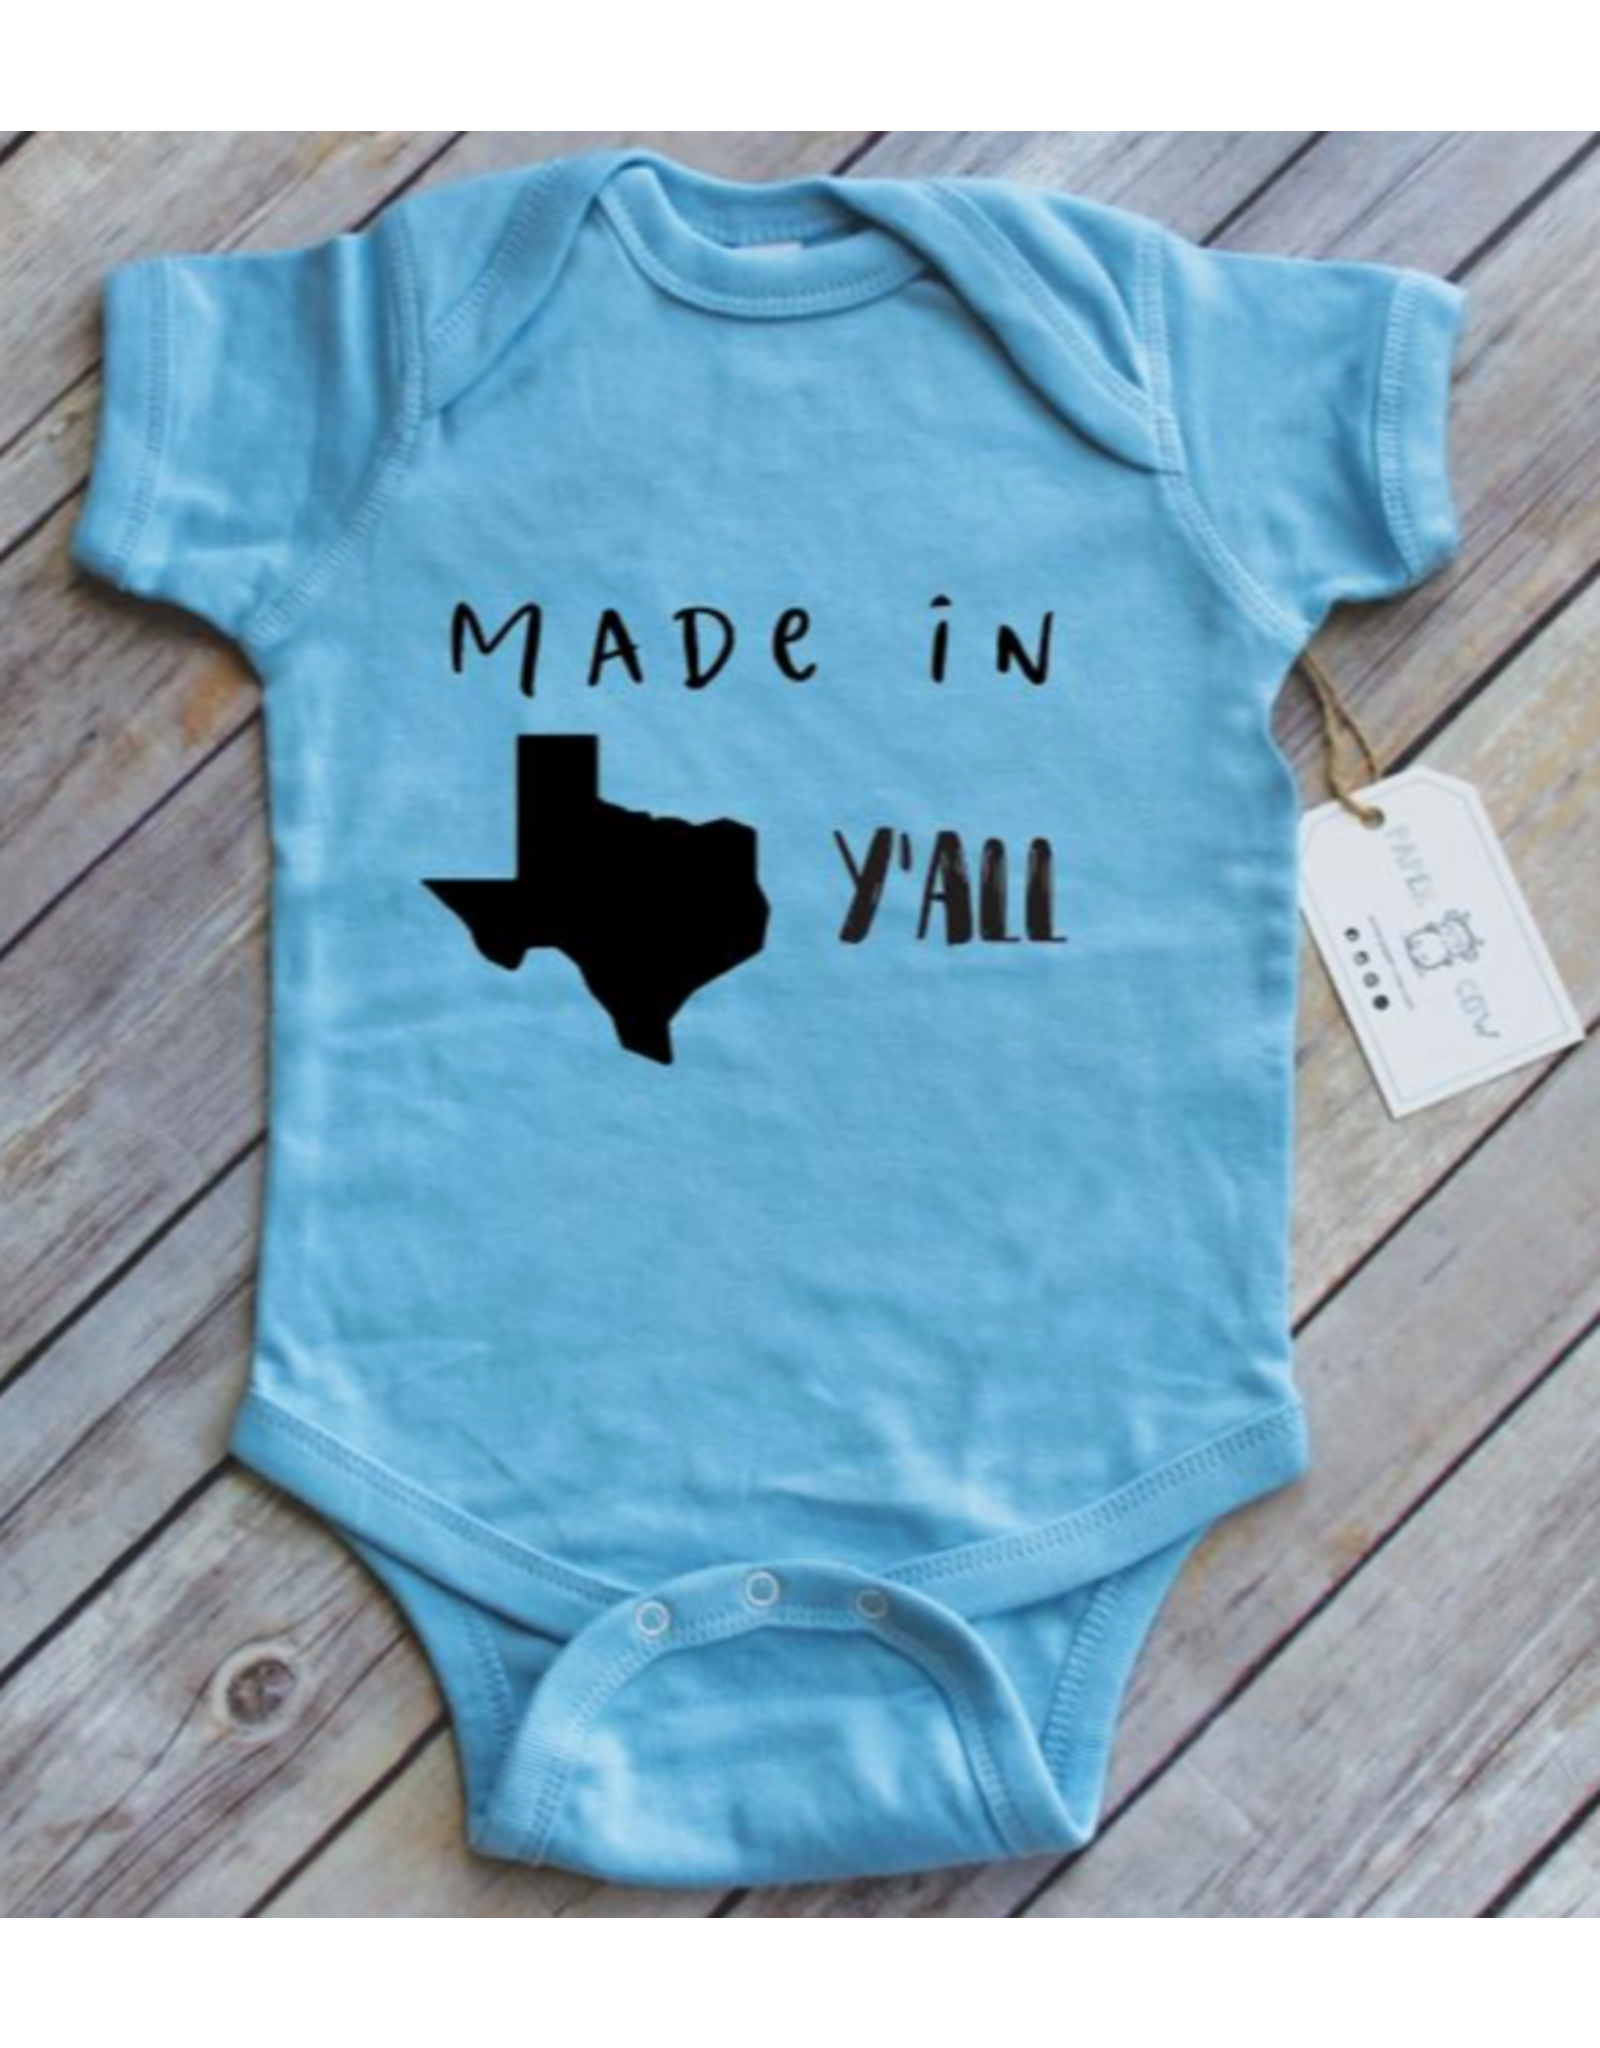 Paper Cow Made in Texas Baby Bodysuit-Blue